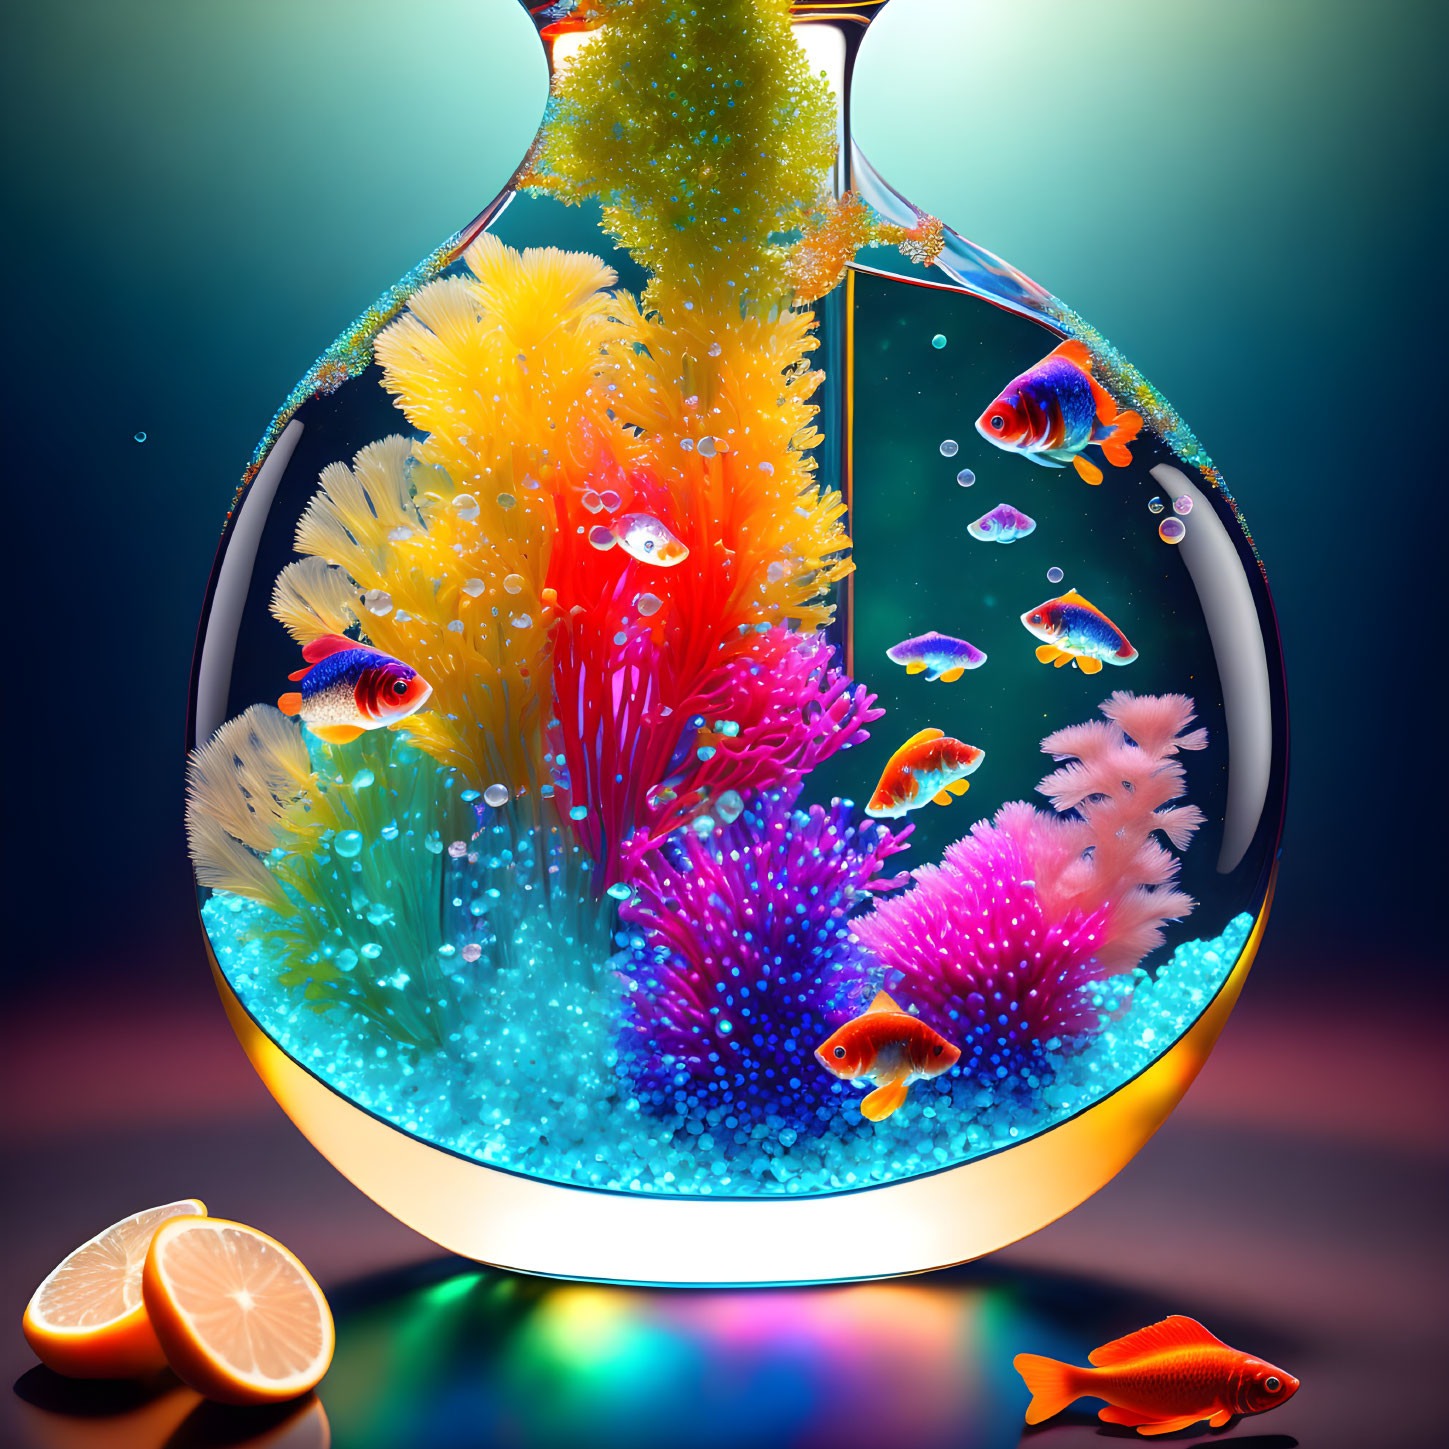 Colorful Fishbowl with Exotic Fish, Neon Coral, and Sliced Orange